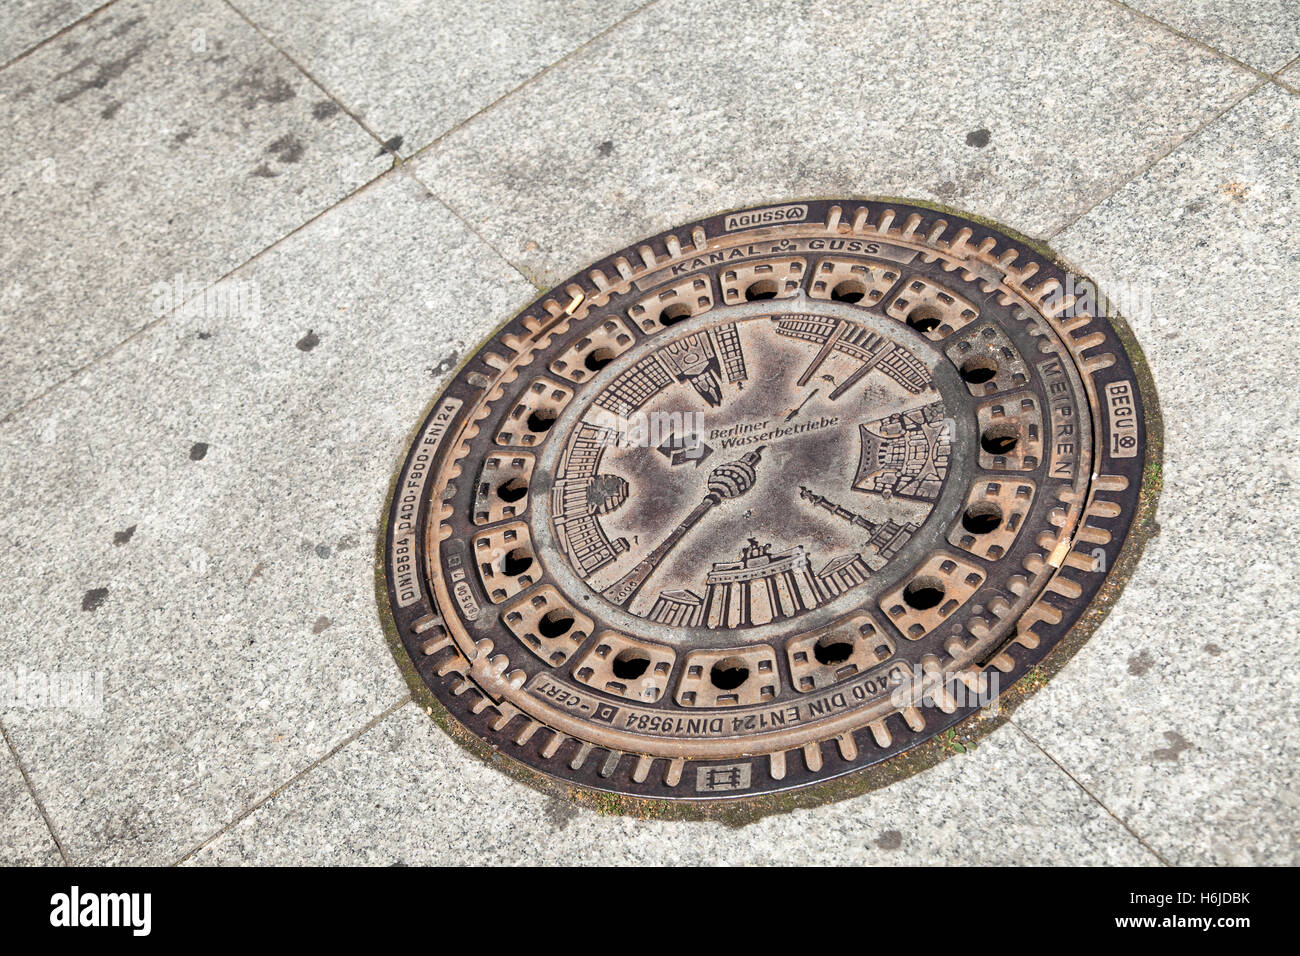 Berlin sewer cover in a street's pavement. Stock Photo